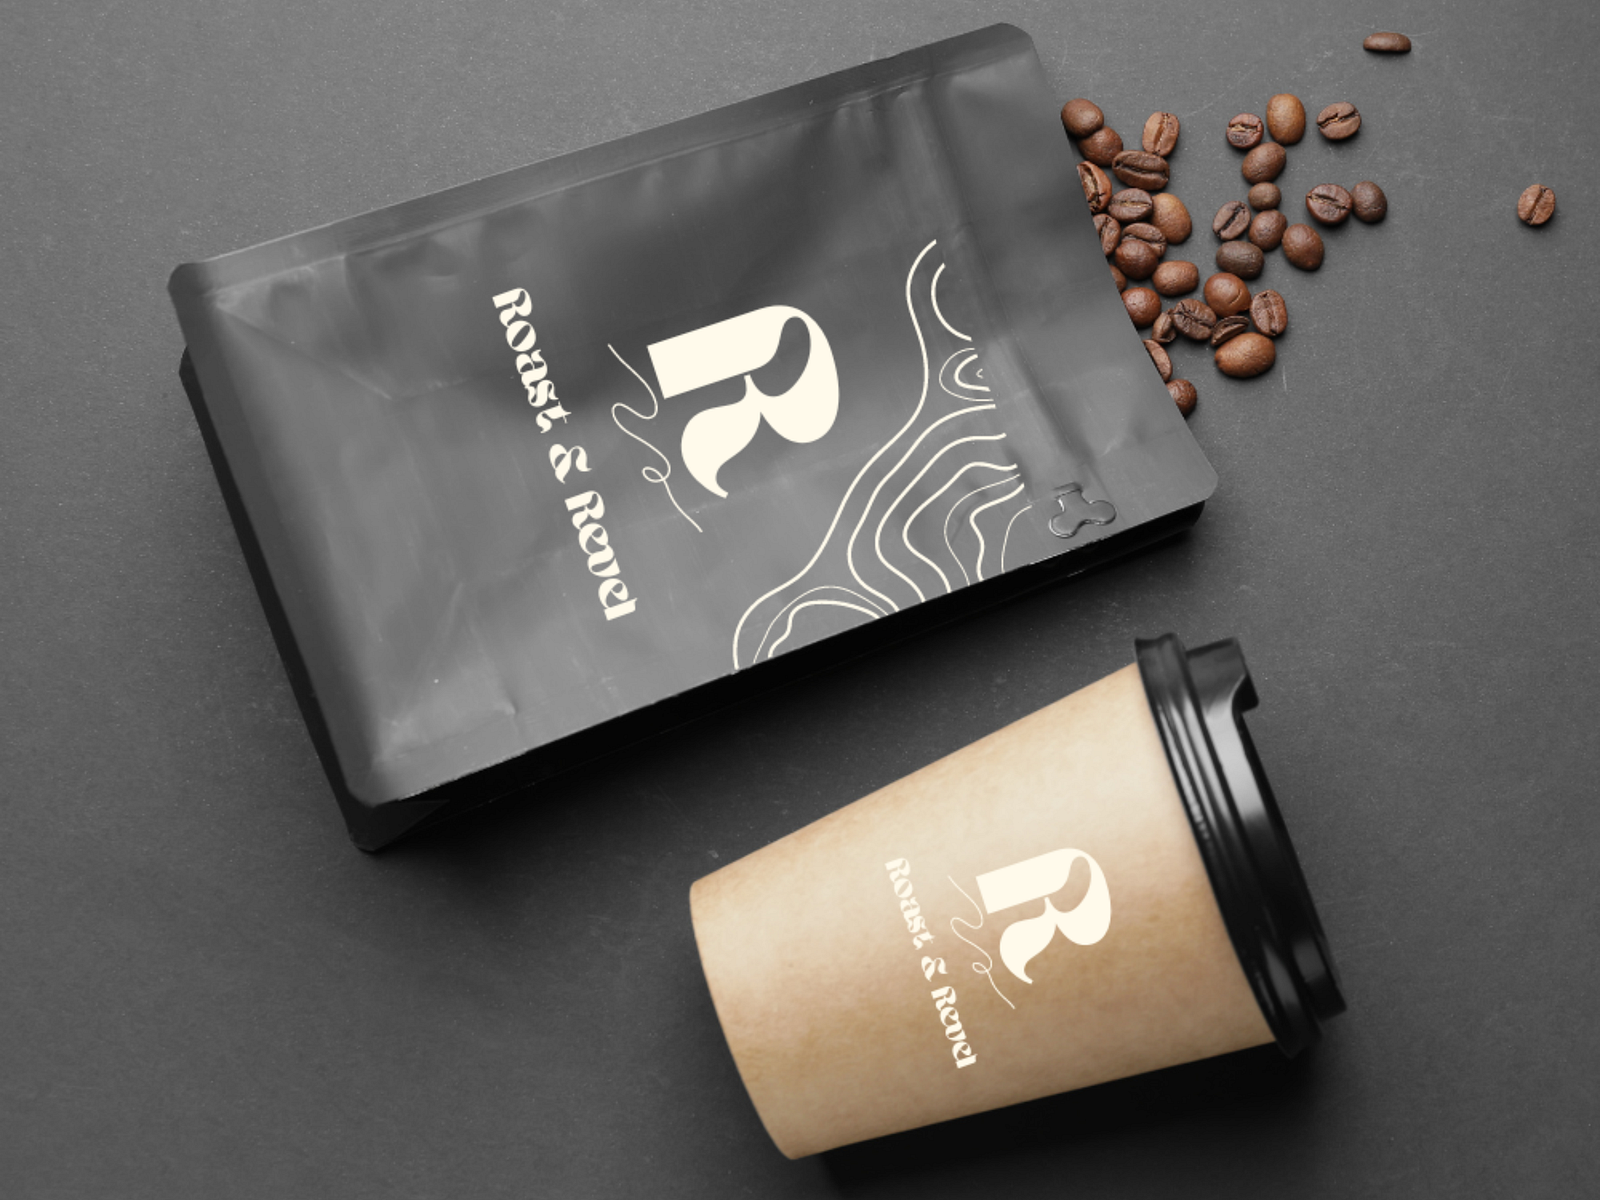 Roast & Revel Coffee Bag + Cup by Lizzy Hymel on Dribbble